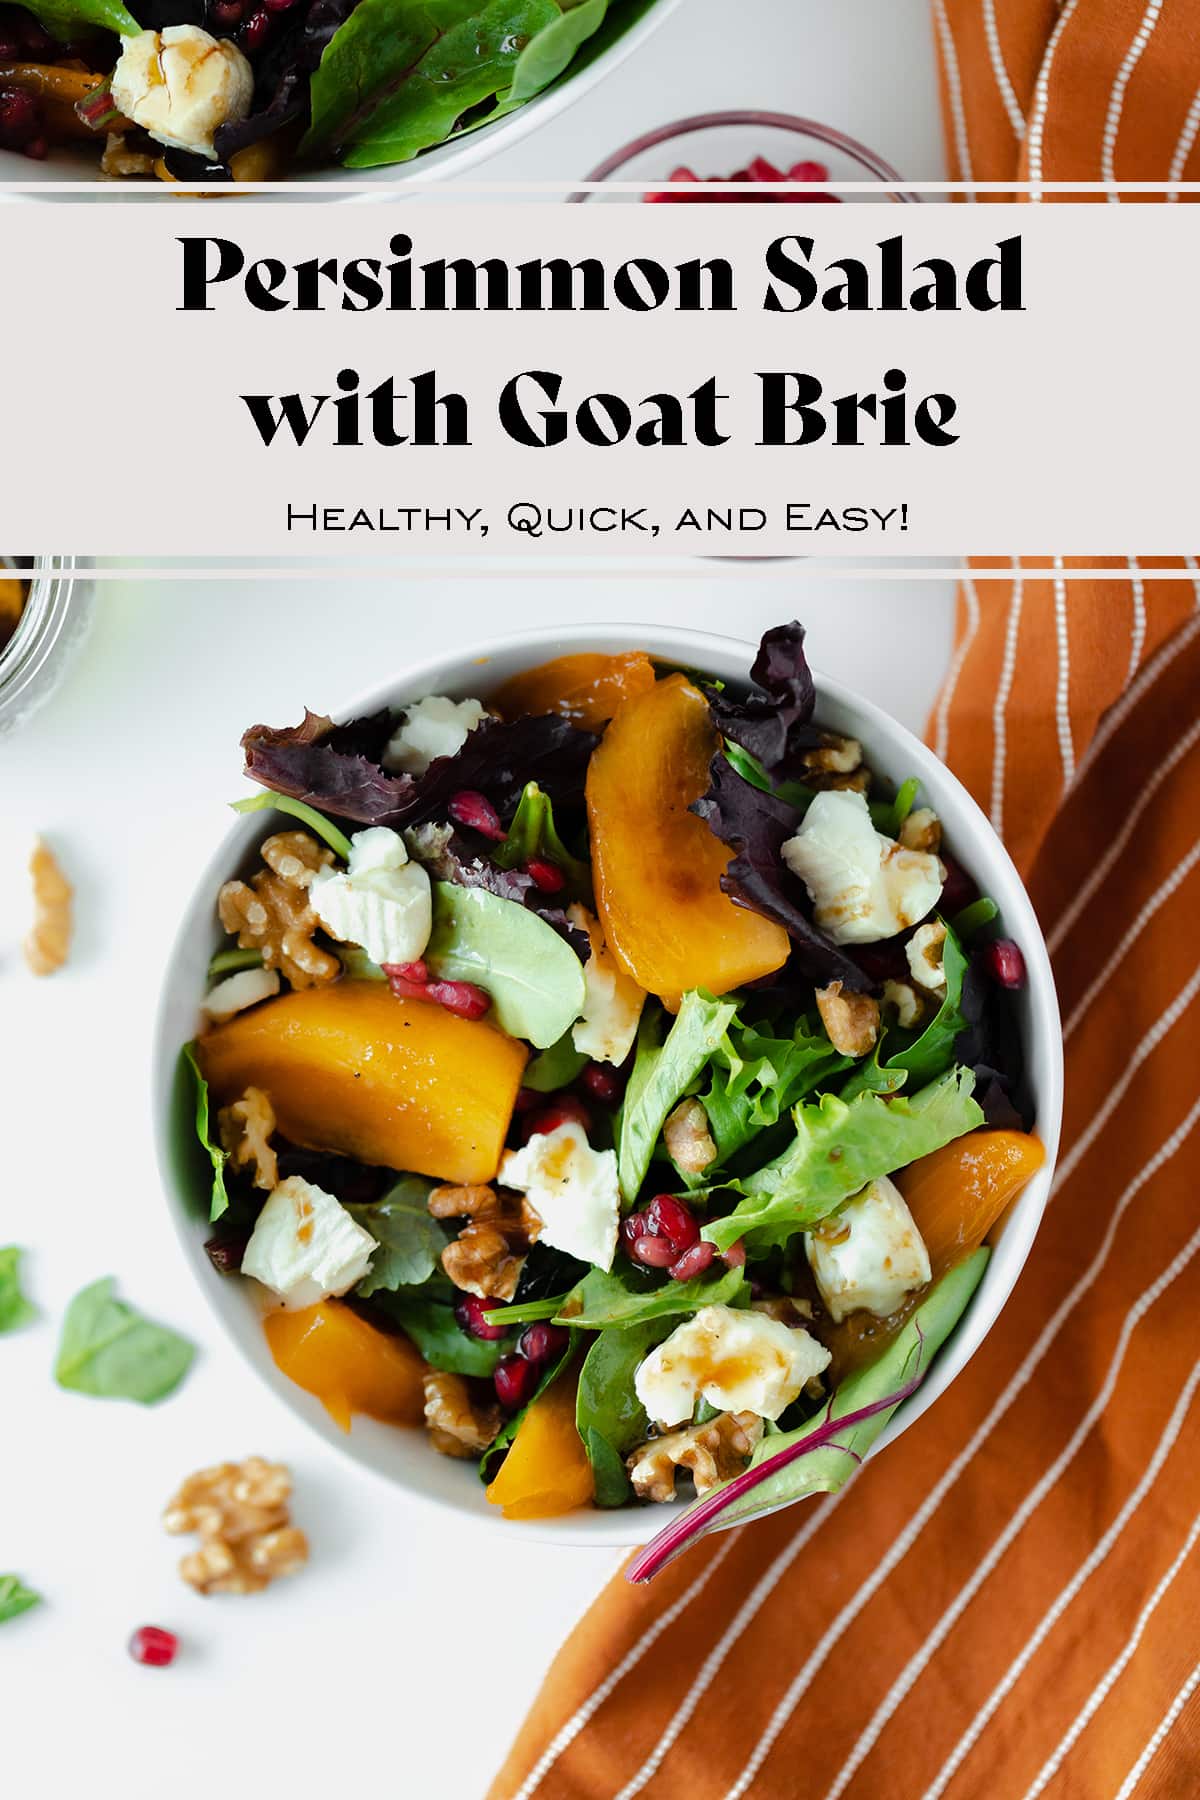 Persimmon Salad with Goat Brie and Pomegranate Seeds